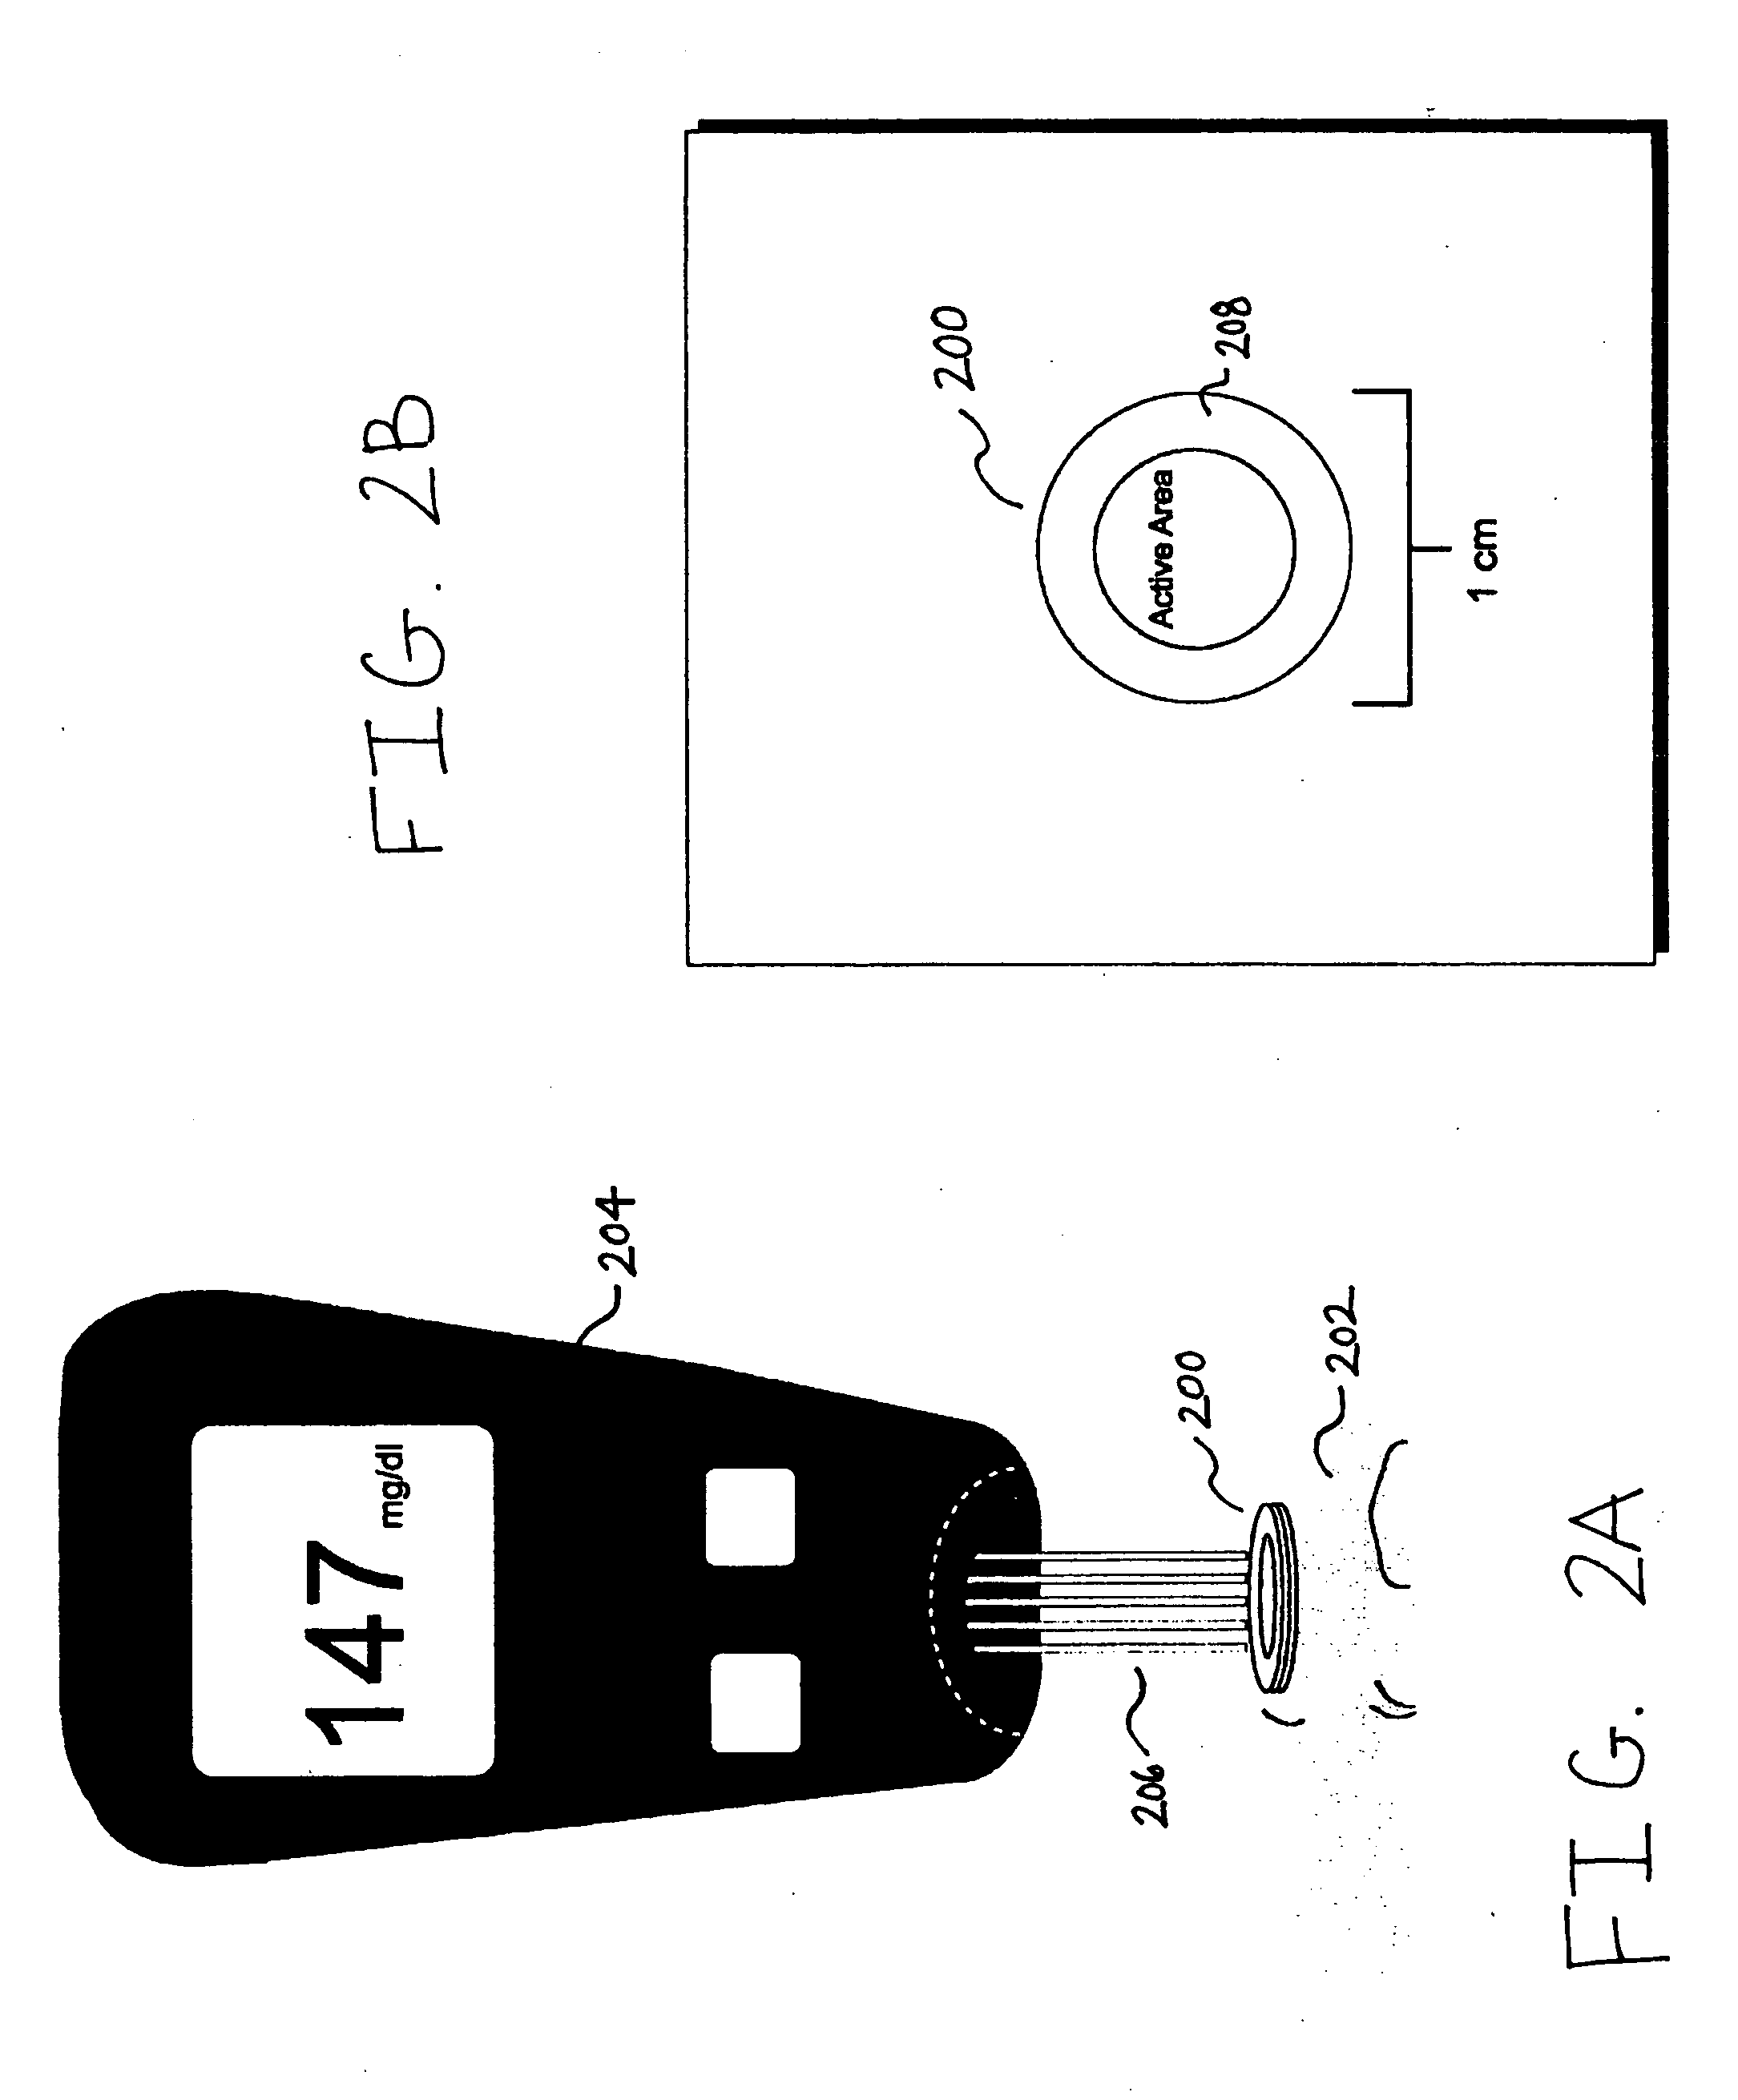 Devices, methods, and kits for non-invasive glucose measurement